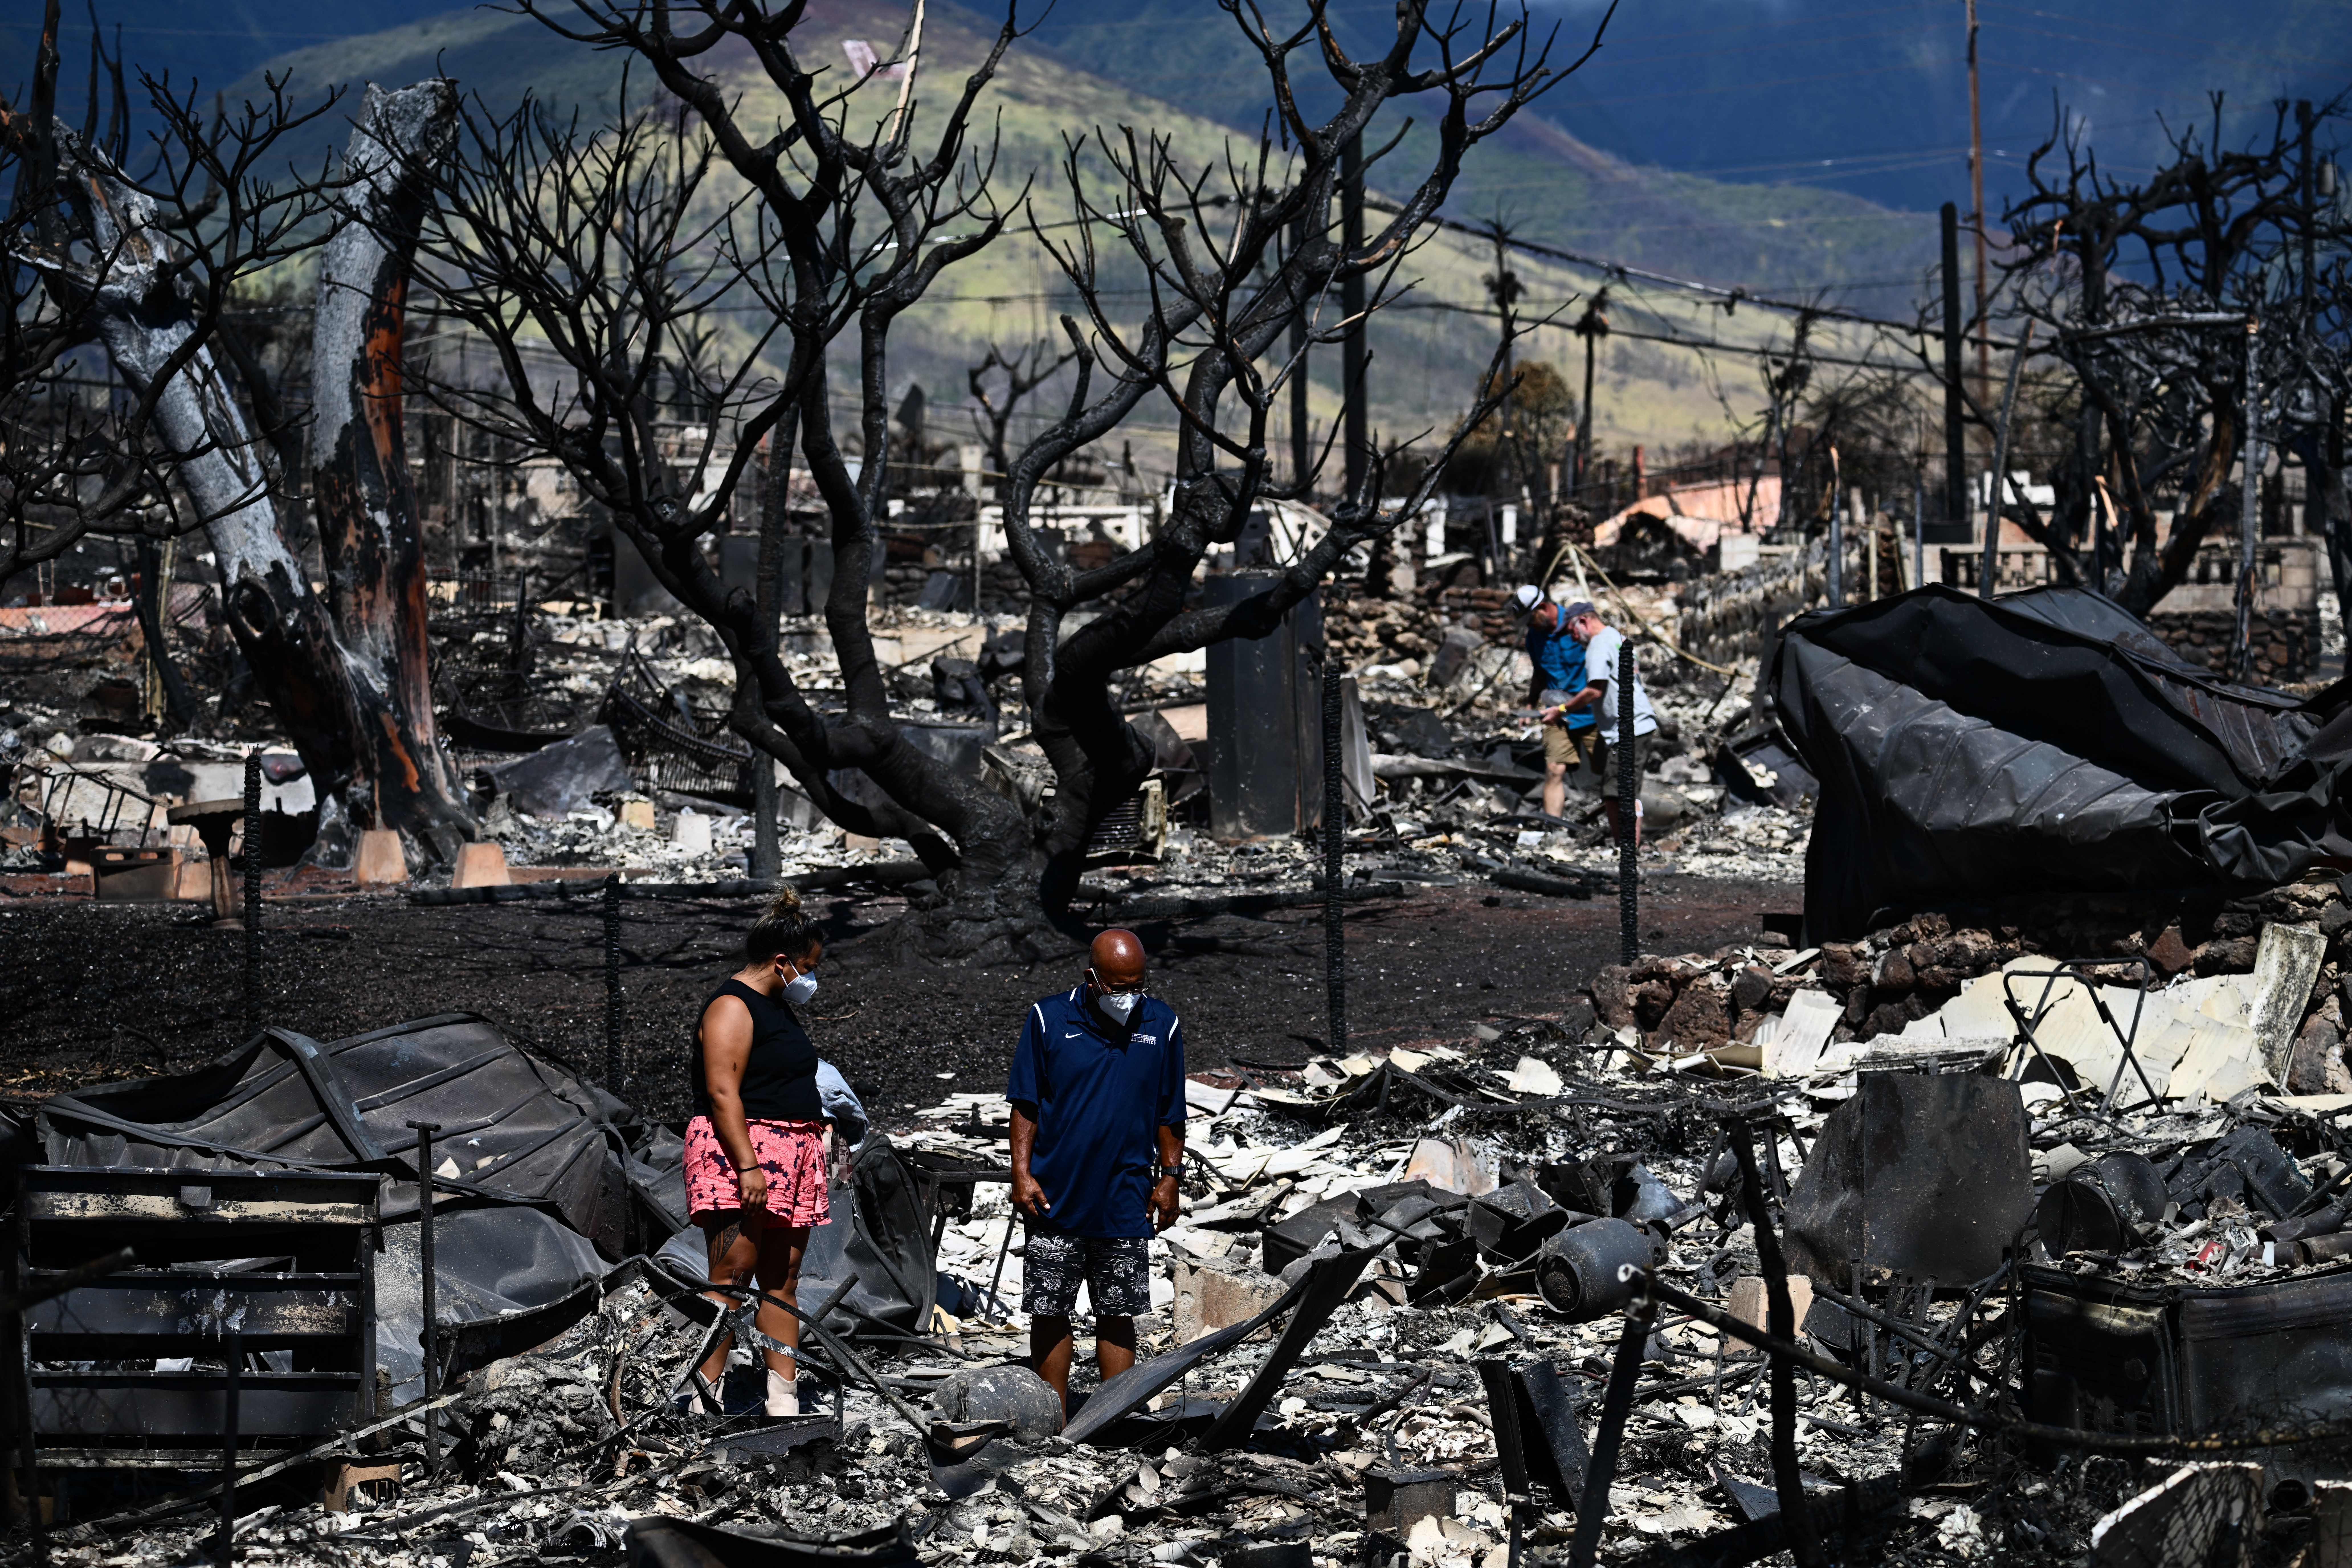 Taylor Ganer and Hano Ganer search for their belongings in the ashes of their family's burnt-down house in the aftermath of a wildfire in Lahaina, western Maui, Hawaii on August 11, 2023. A wildfire that left Lahaina in charred ruins has killed at least 67 people, authorities said on August 11, making it one of the deadliest disasters in the US state's history. Brushfires on Maui, fueled by high winds from Hurricane Dora passing to the south of Hawaii, broke out August 8 and rapidly engulfed Lahaina. (Photo by Patrick T. Fallon / AFP) (Photo by PATRICK T. FALLON/AFP via Getty Images)